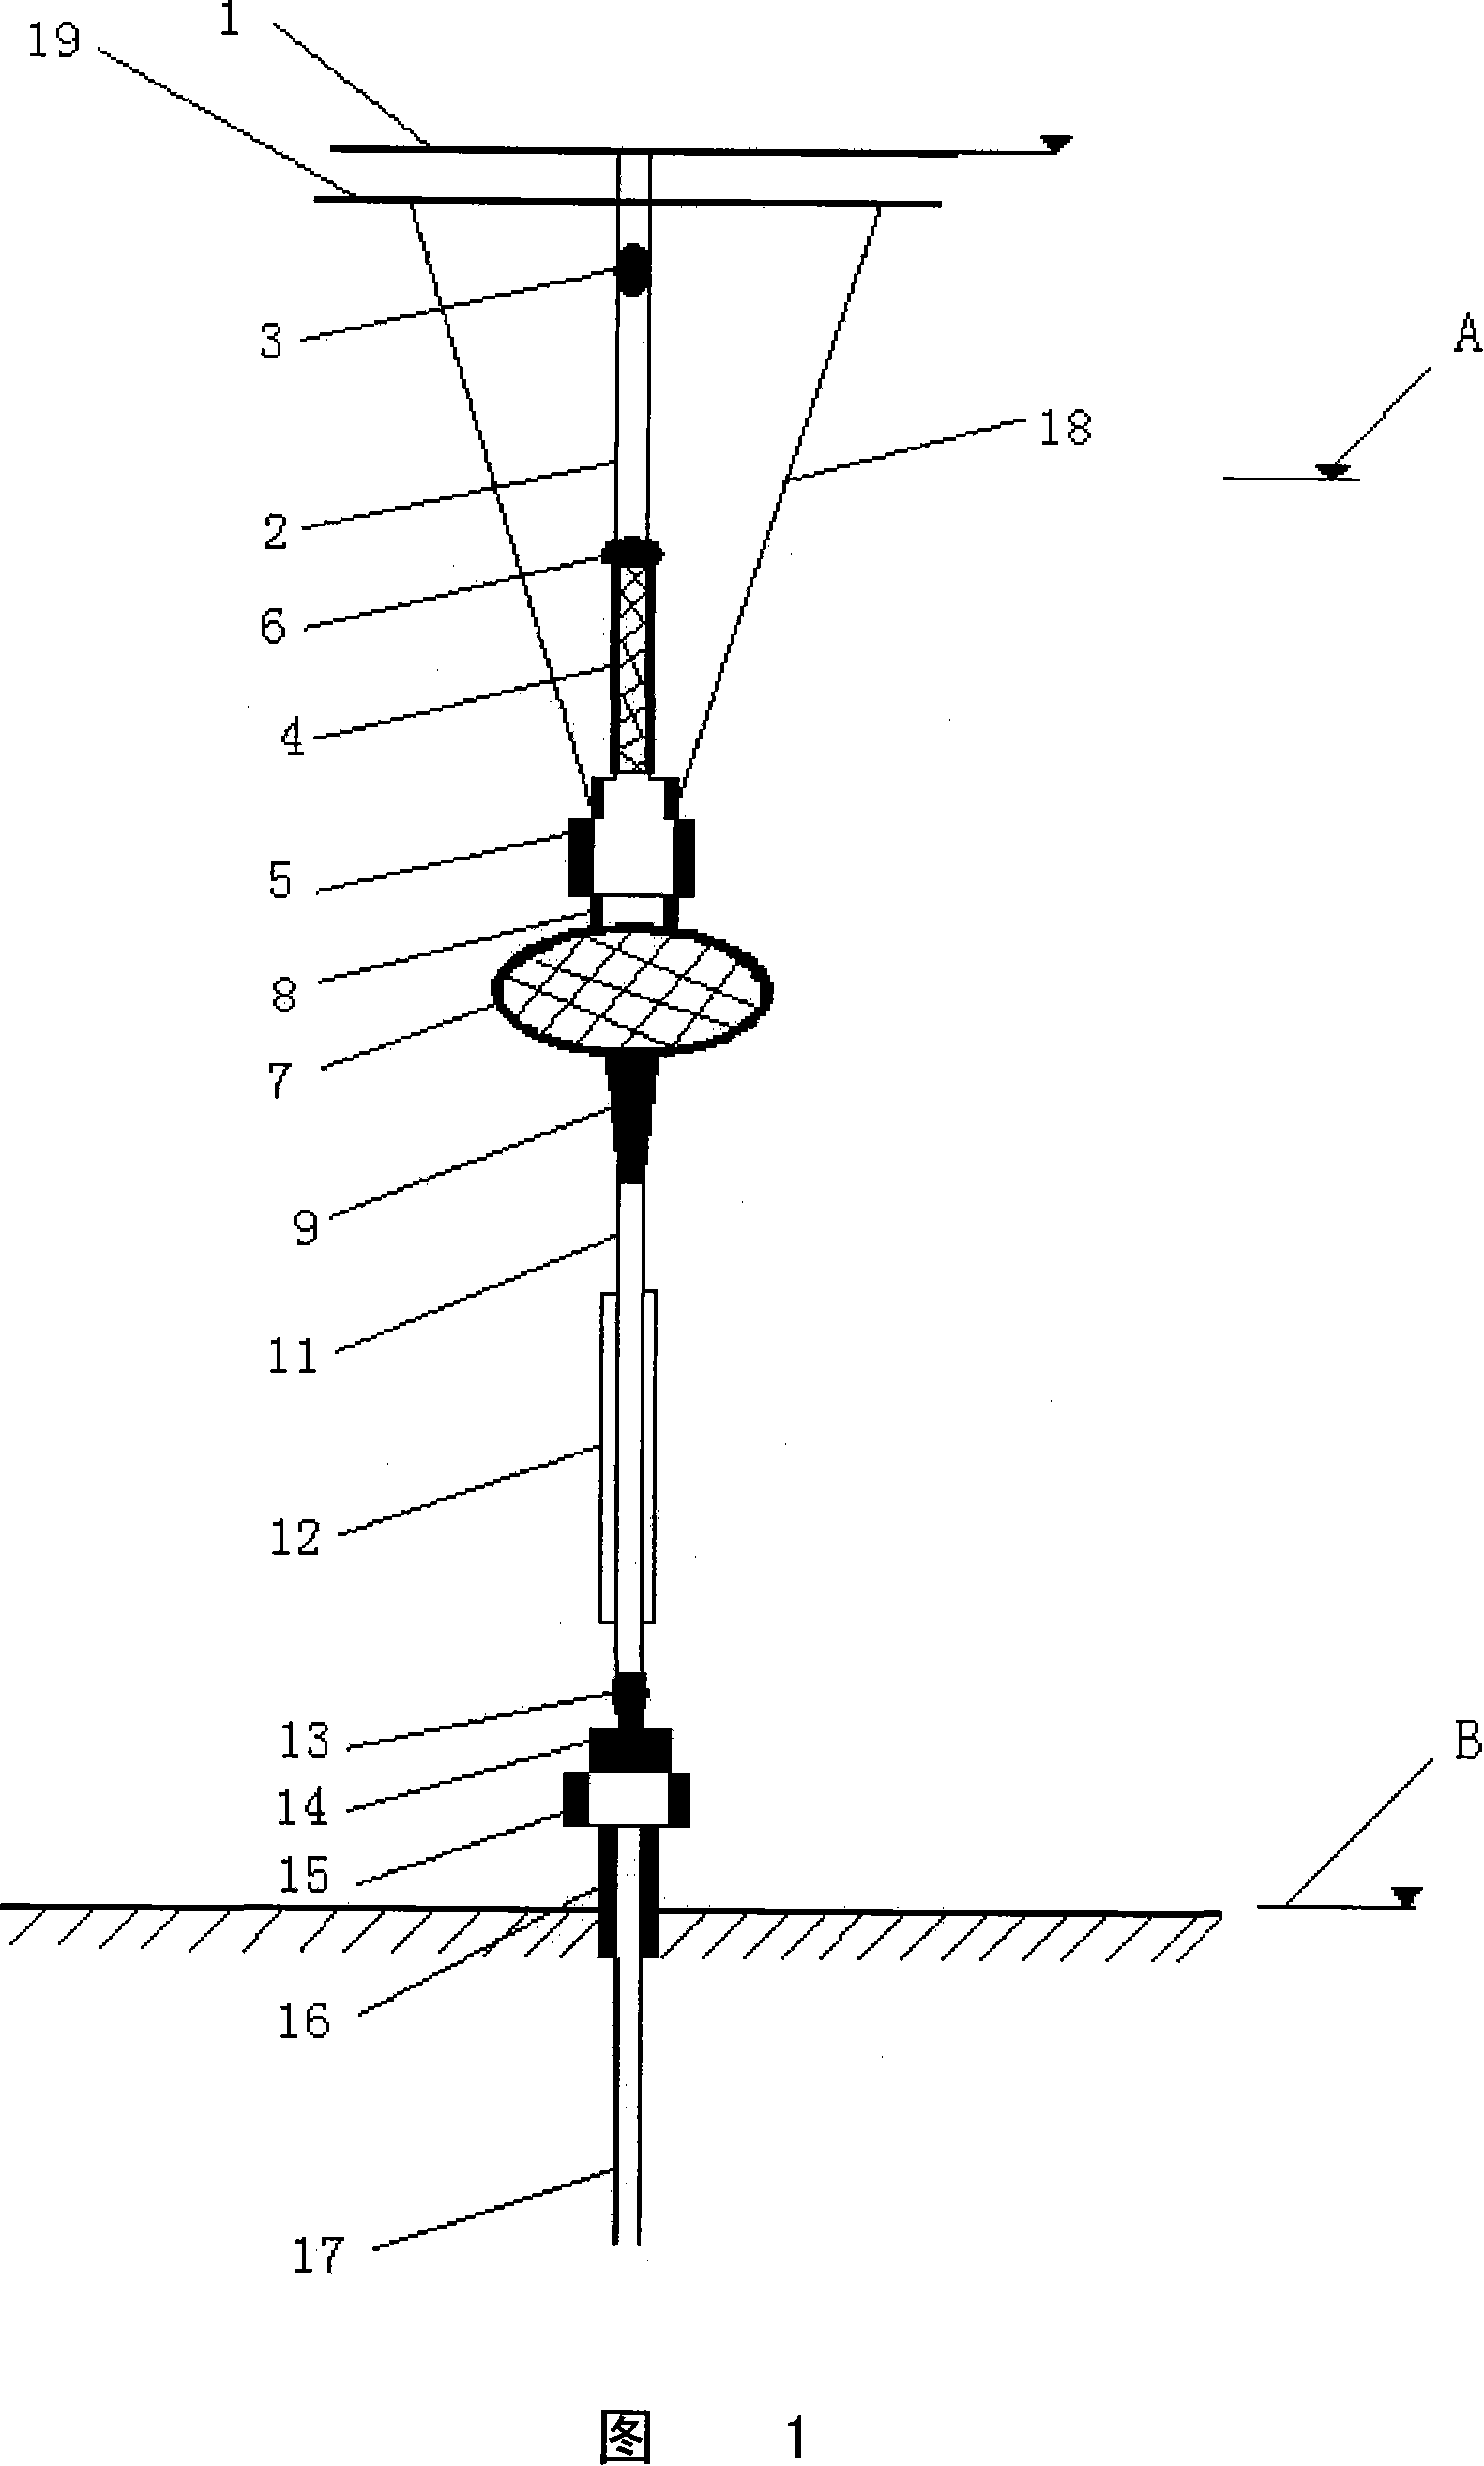 Deepwater drilling device based on near surface deviation